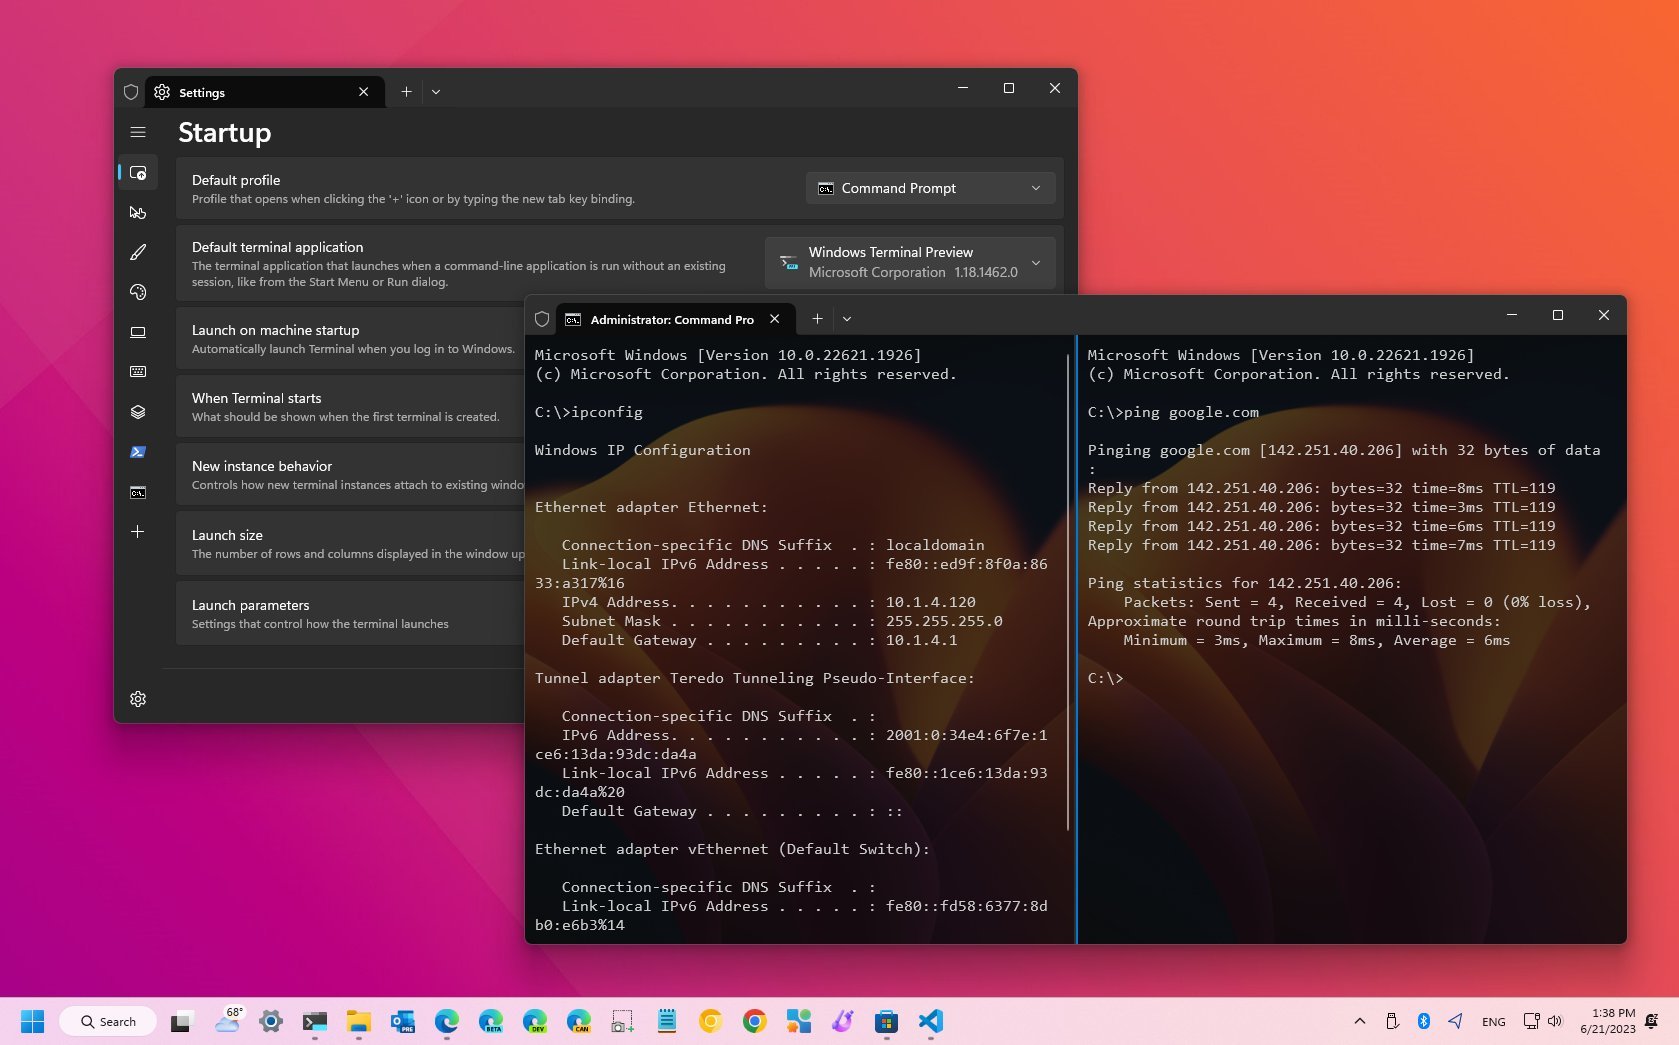 How to get started using Windows Terminal app on Windows 11